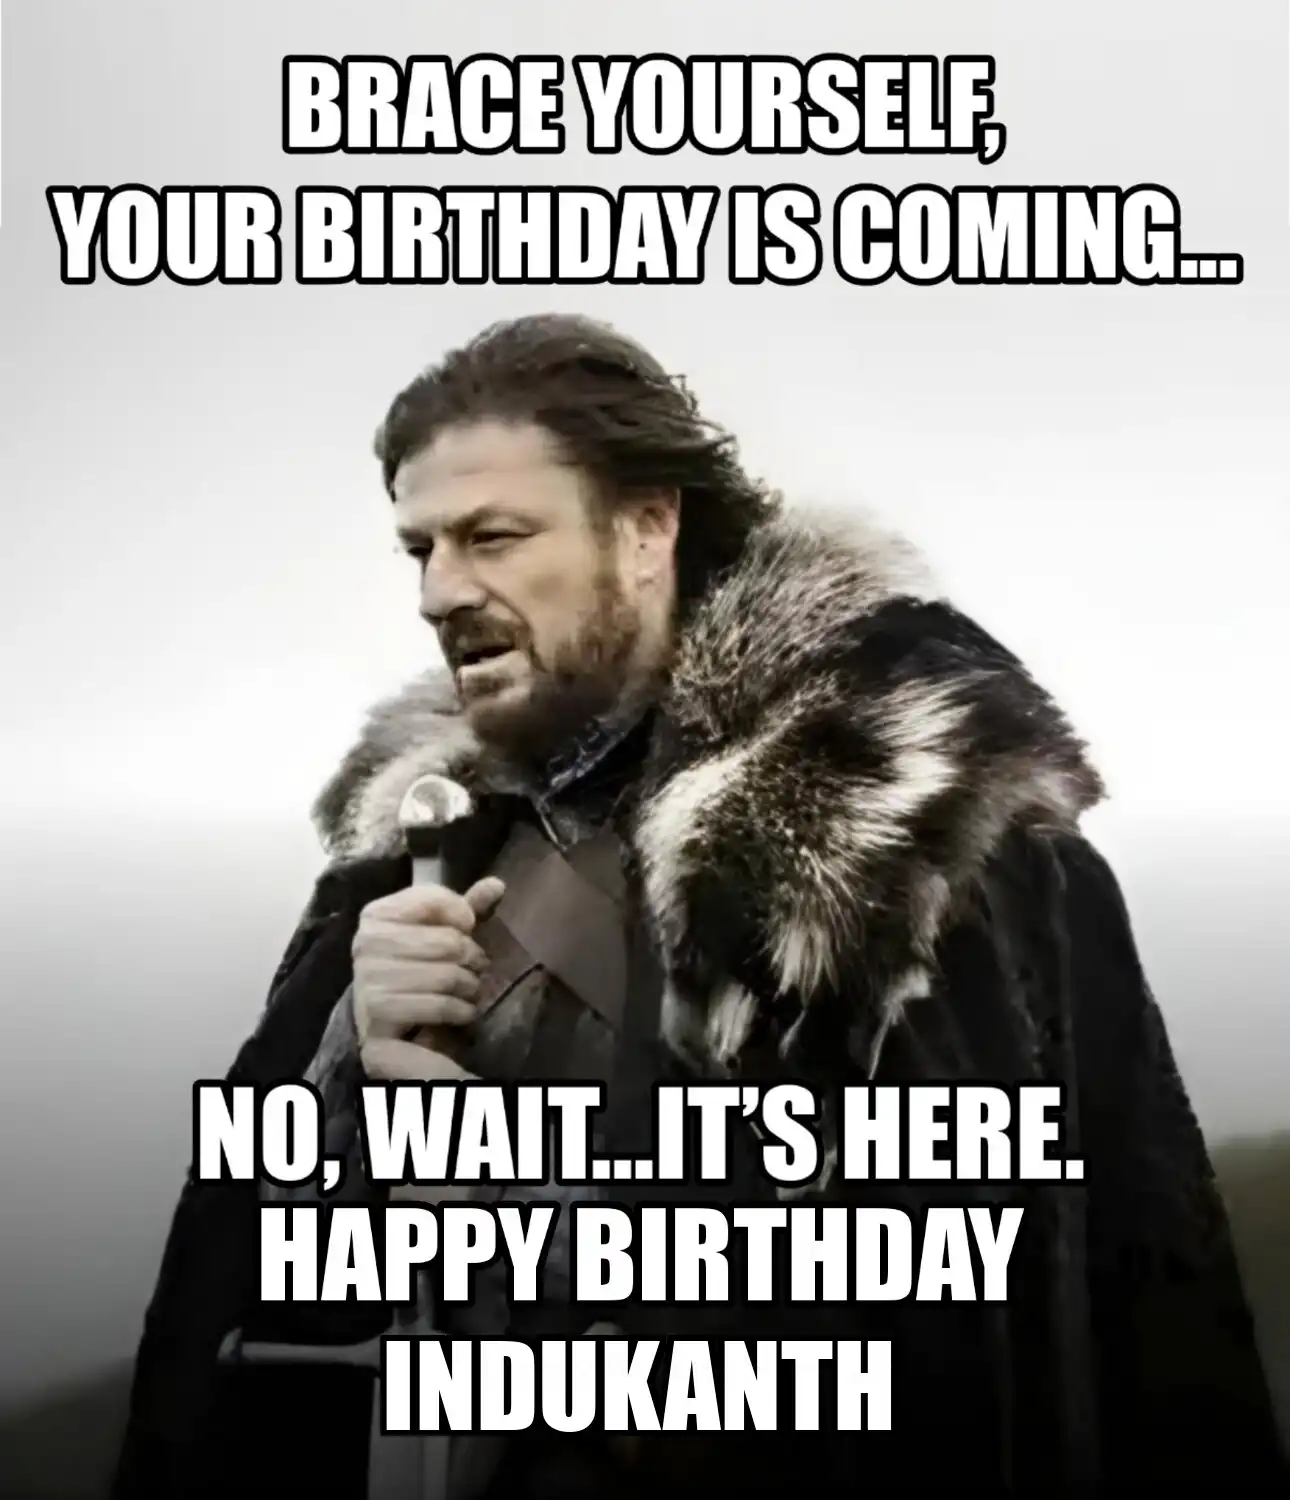 Happy Birthday Indukanth Brace Yourself Your Birthday Is Coming Meme